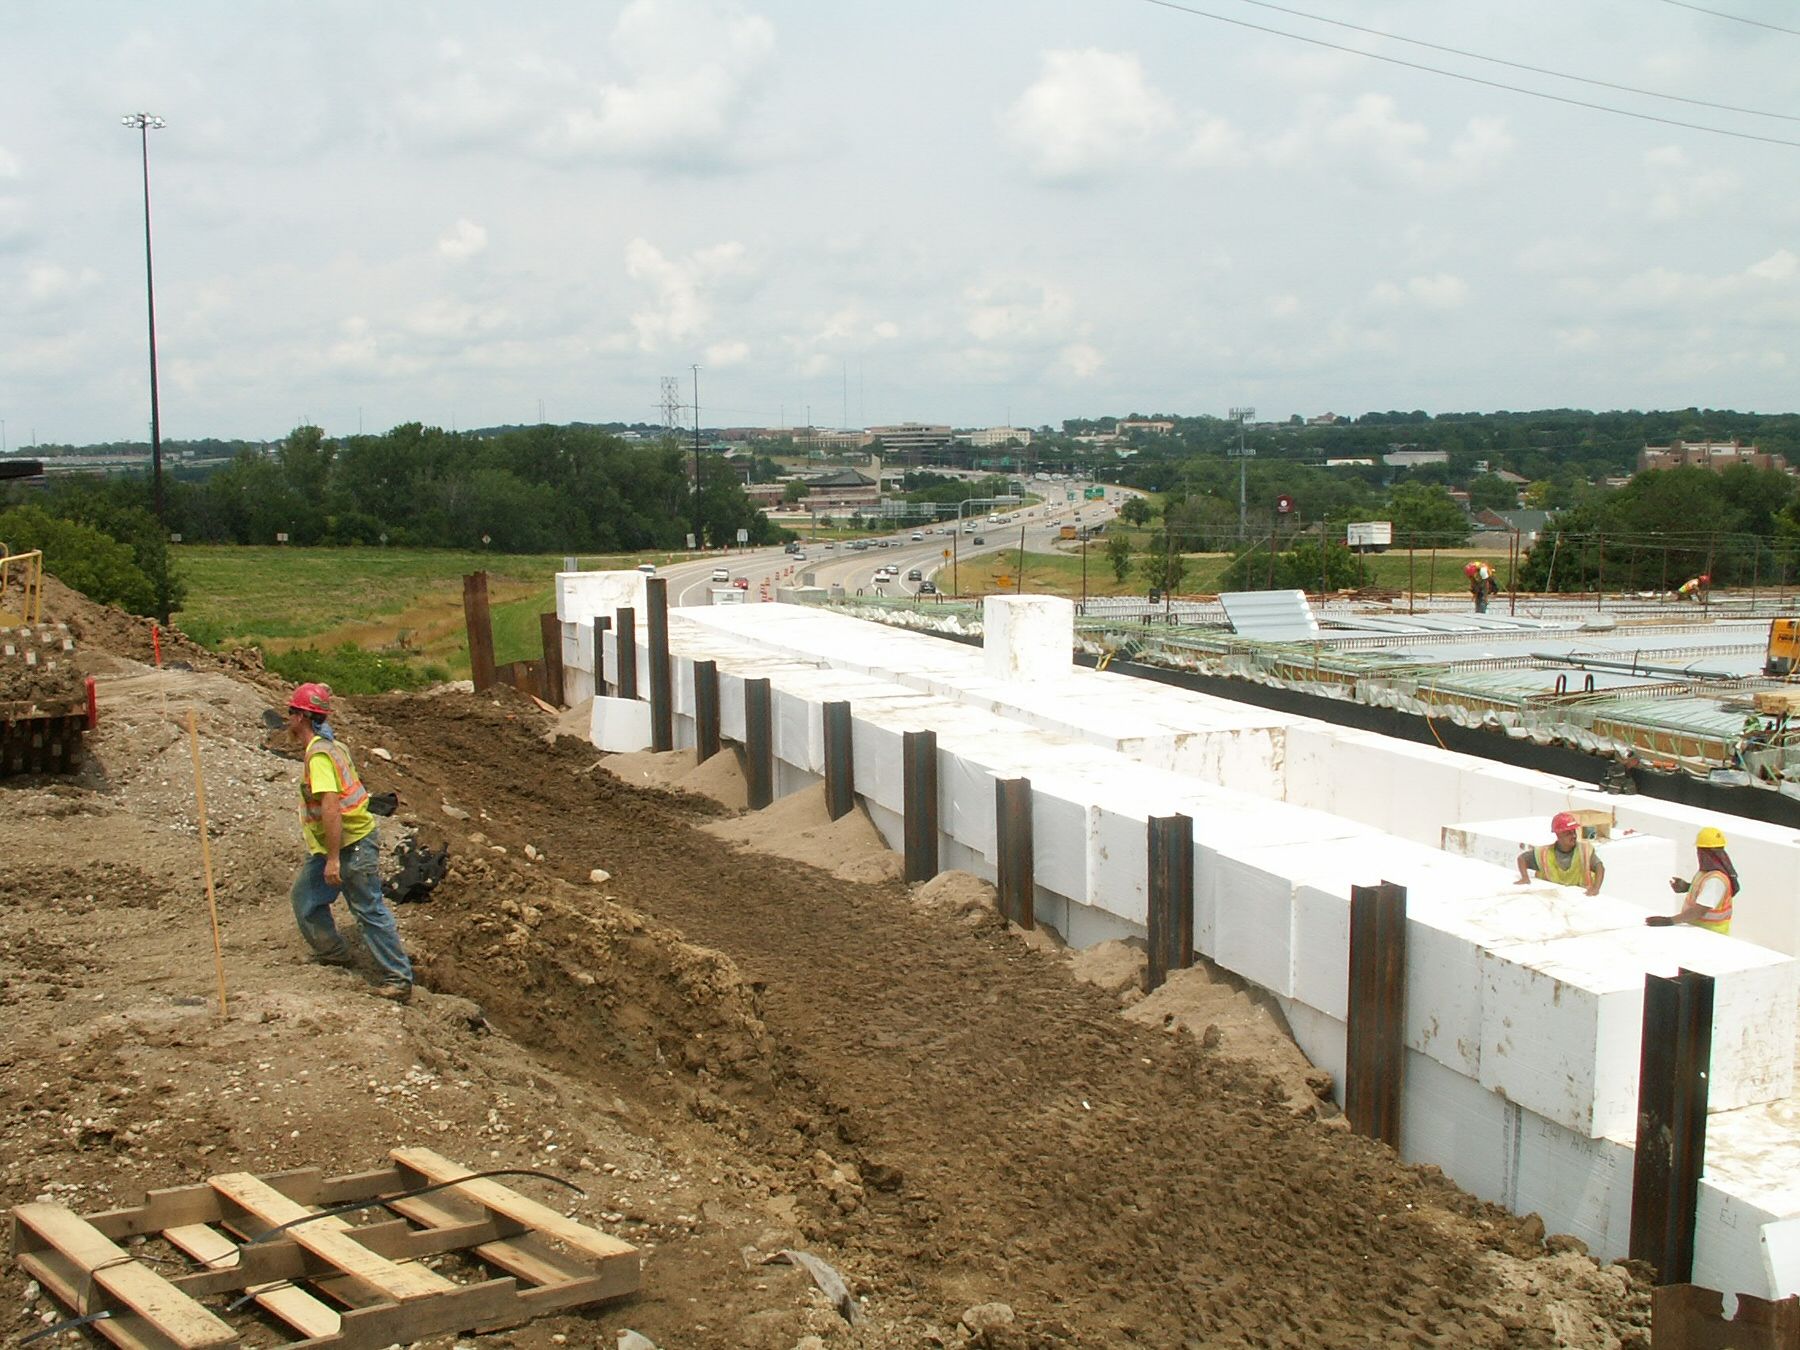 The existing 2:1 slope protection was removed and replaced by abutment walls allowing room for t he needed extra lane